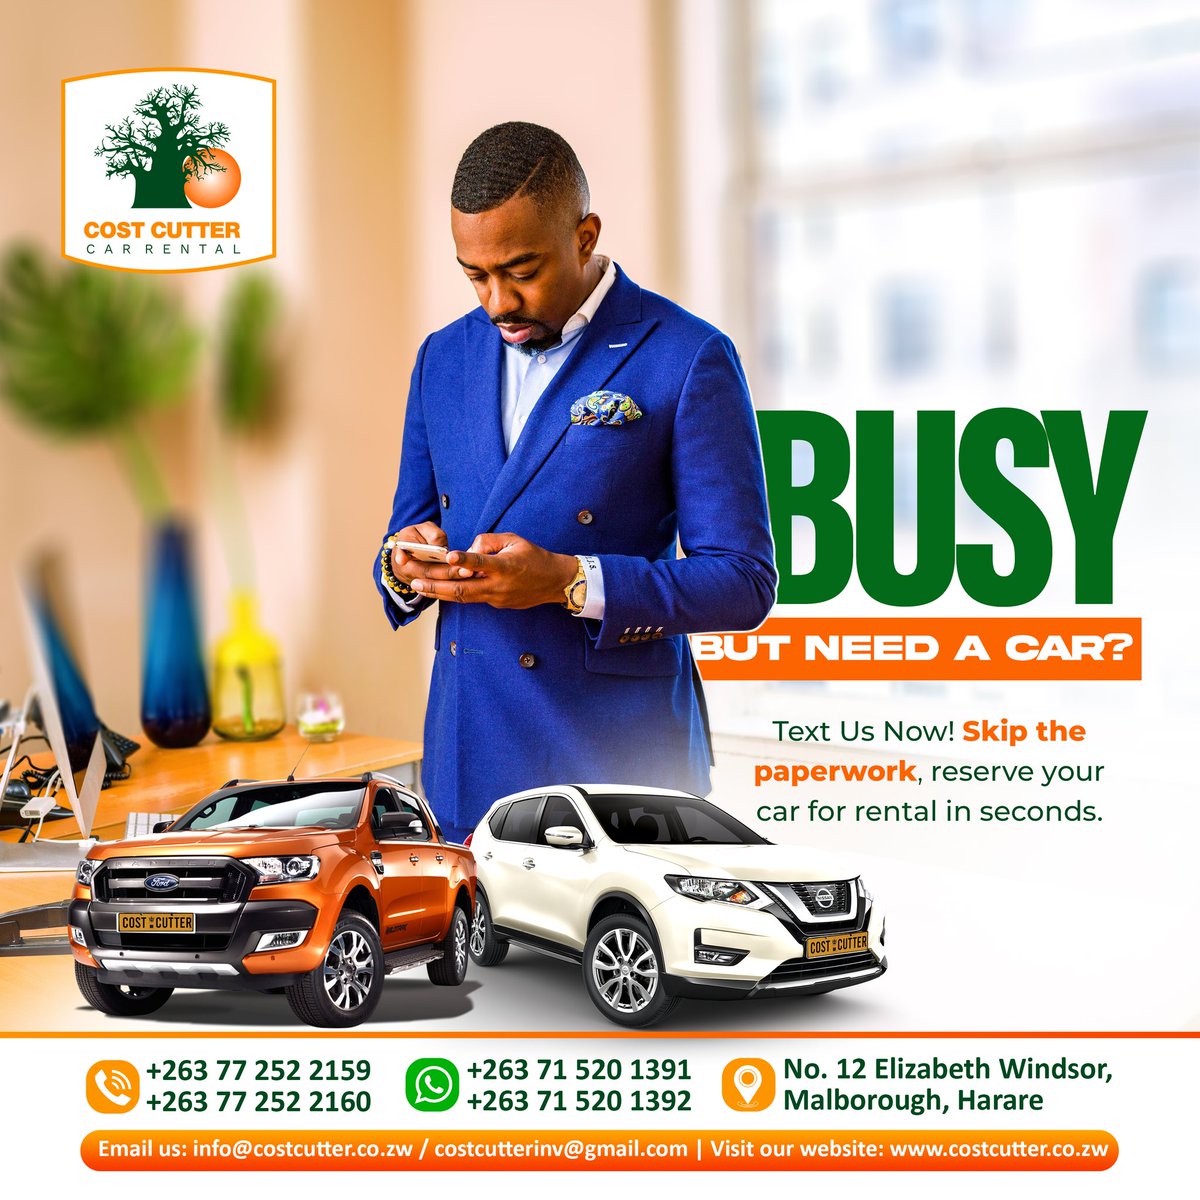 Let us take the stress out of your transport equation and empower you to conquer your hectic itinerary with ease this week. Enjoy the freedom and convenience of having your own vehicle book online or simply send us a WhatsApp message! #costcuttercarrental #carrentalharare